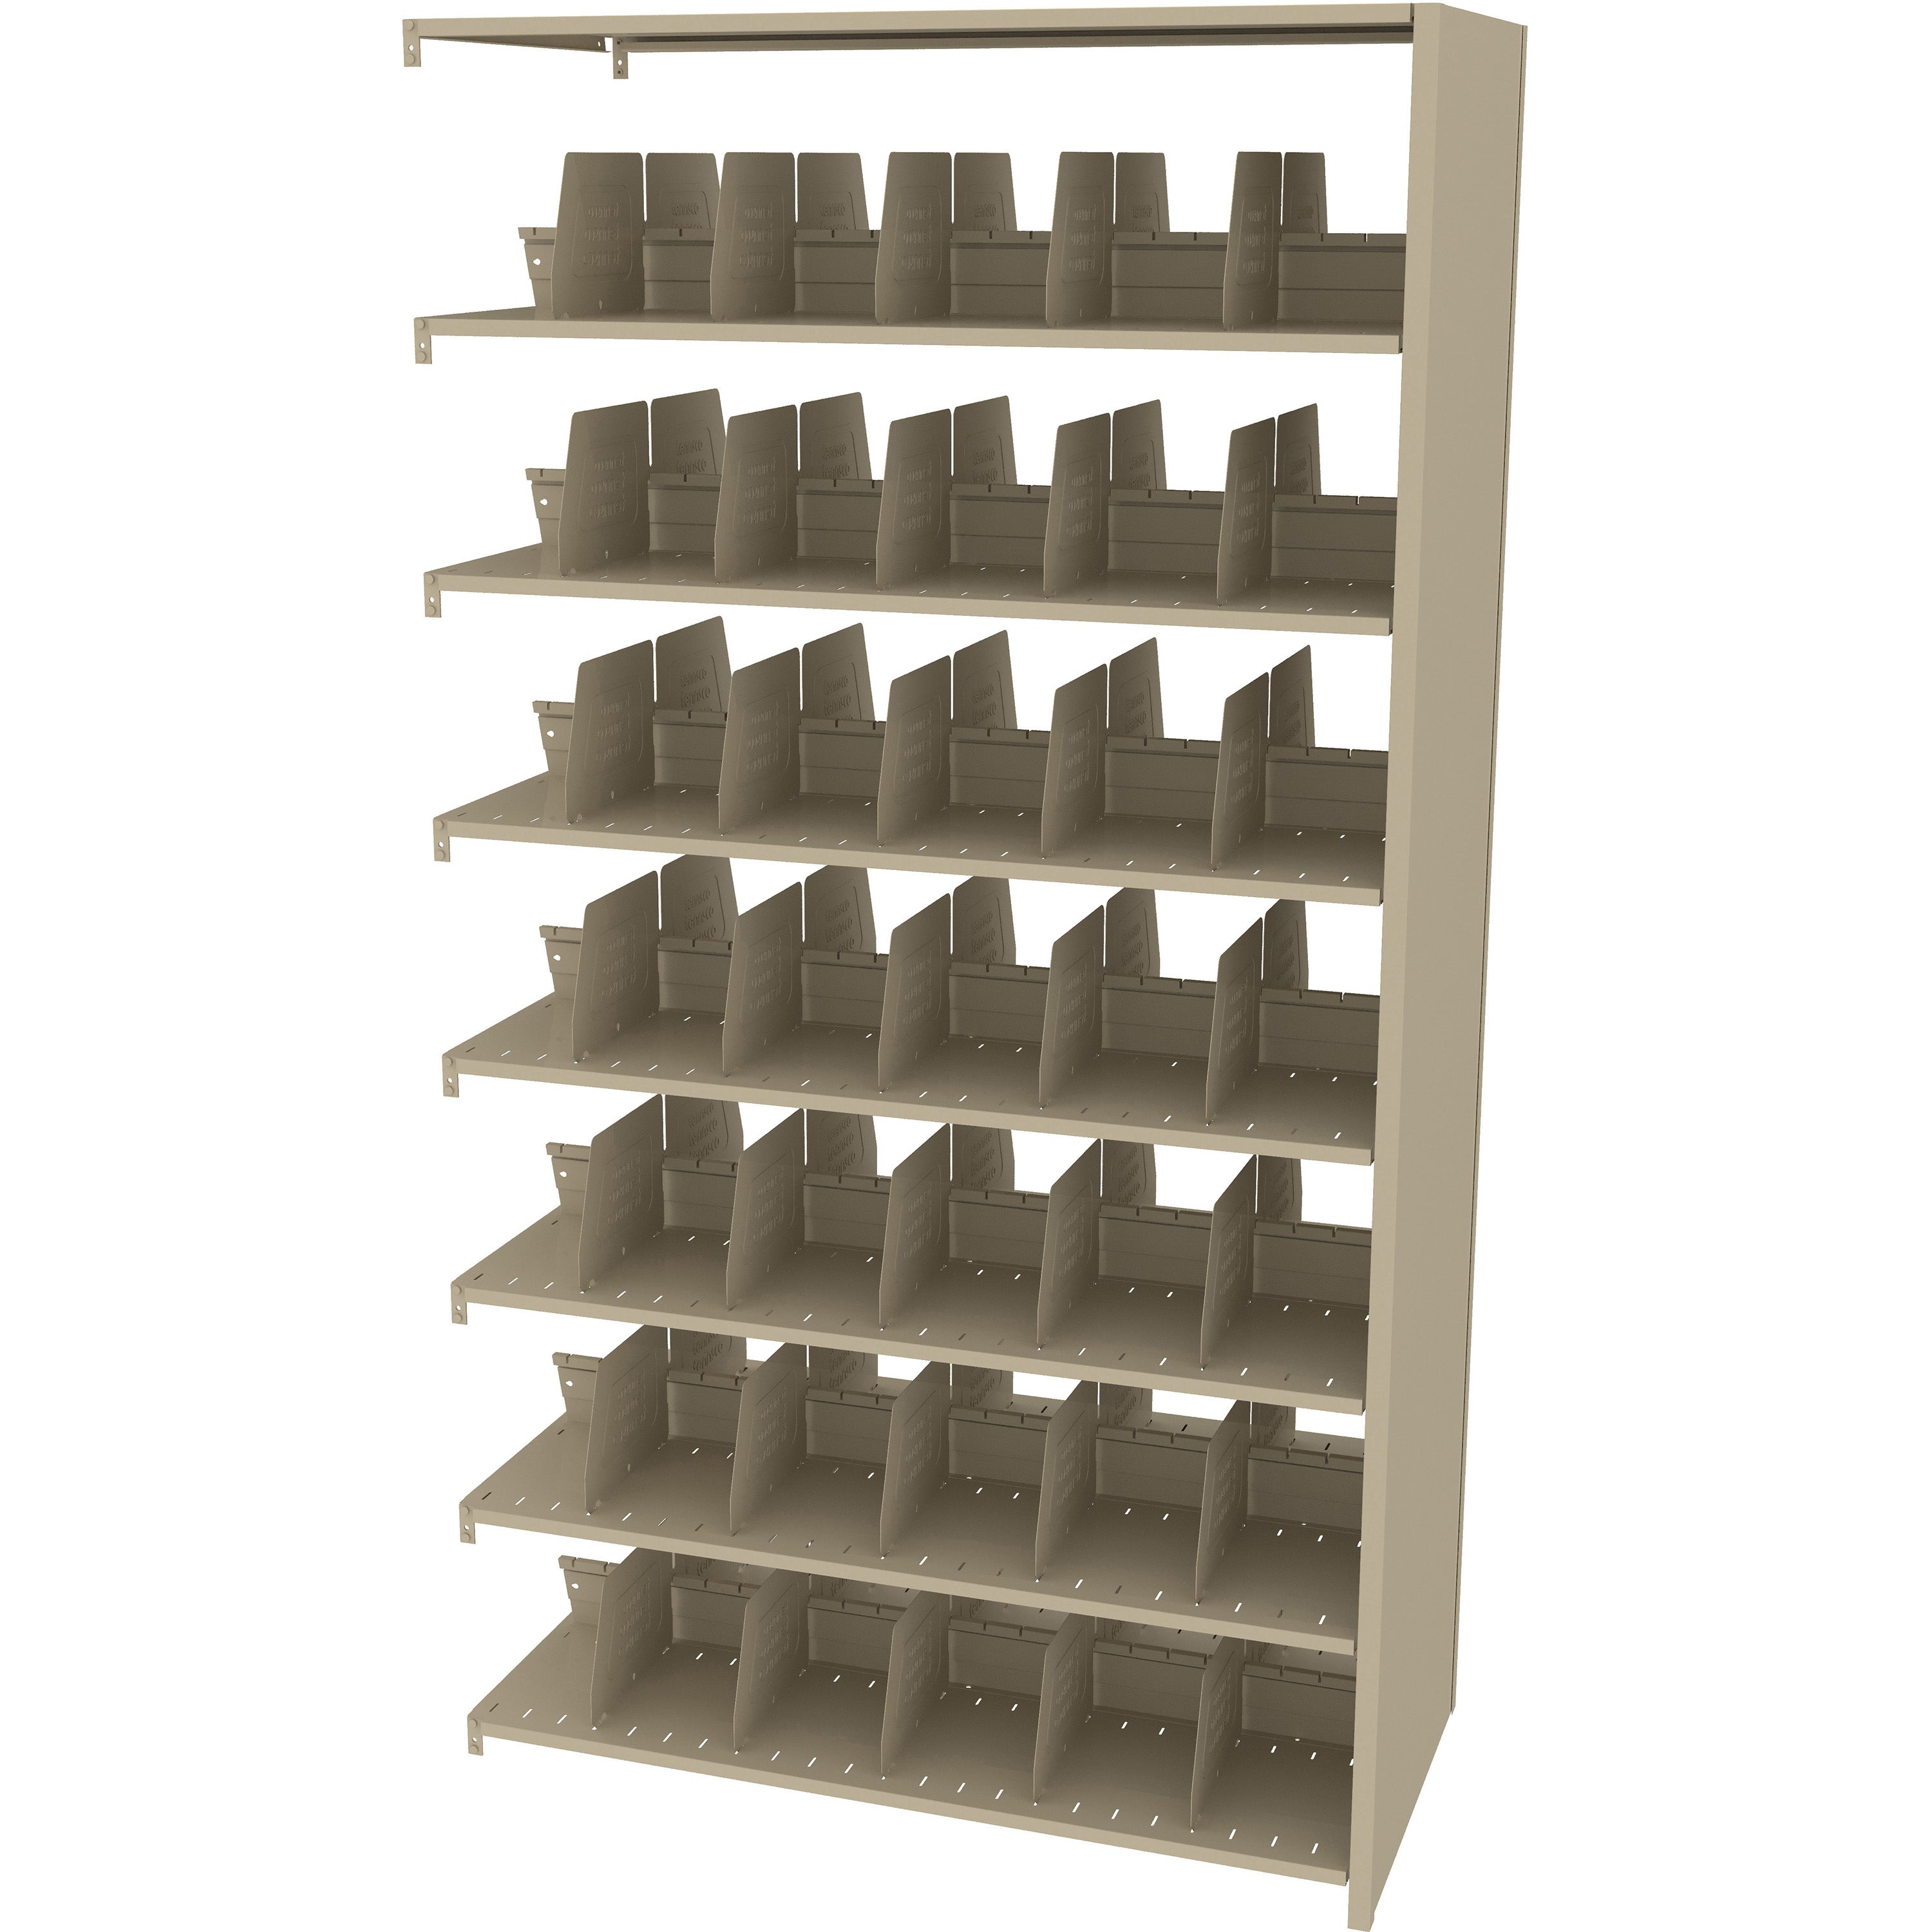 Tennsco 88" High Double Entry Imperial Shelving Adder Unit - 14 Openings, 248848AC